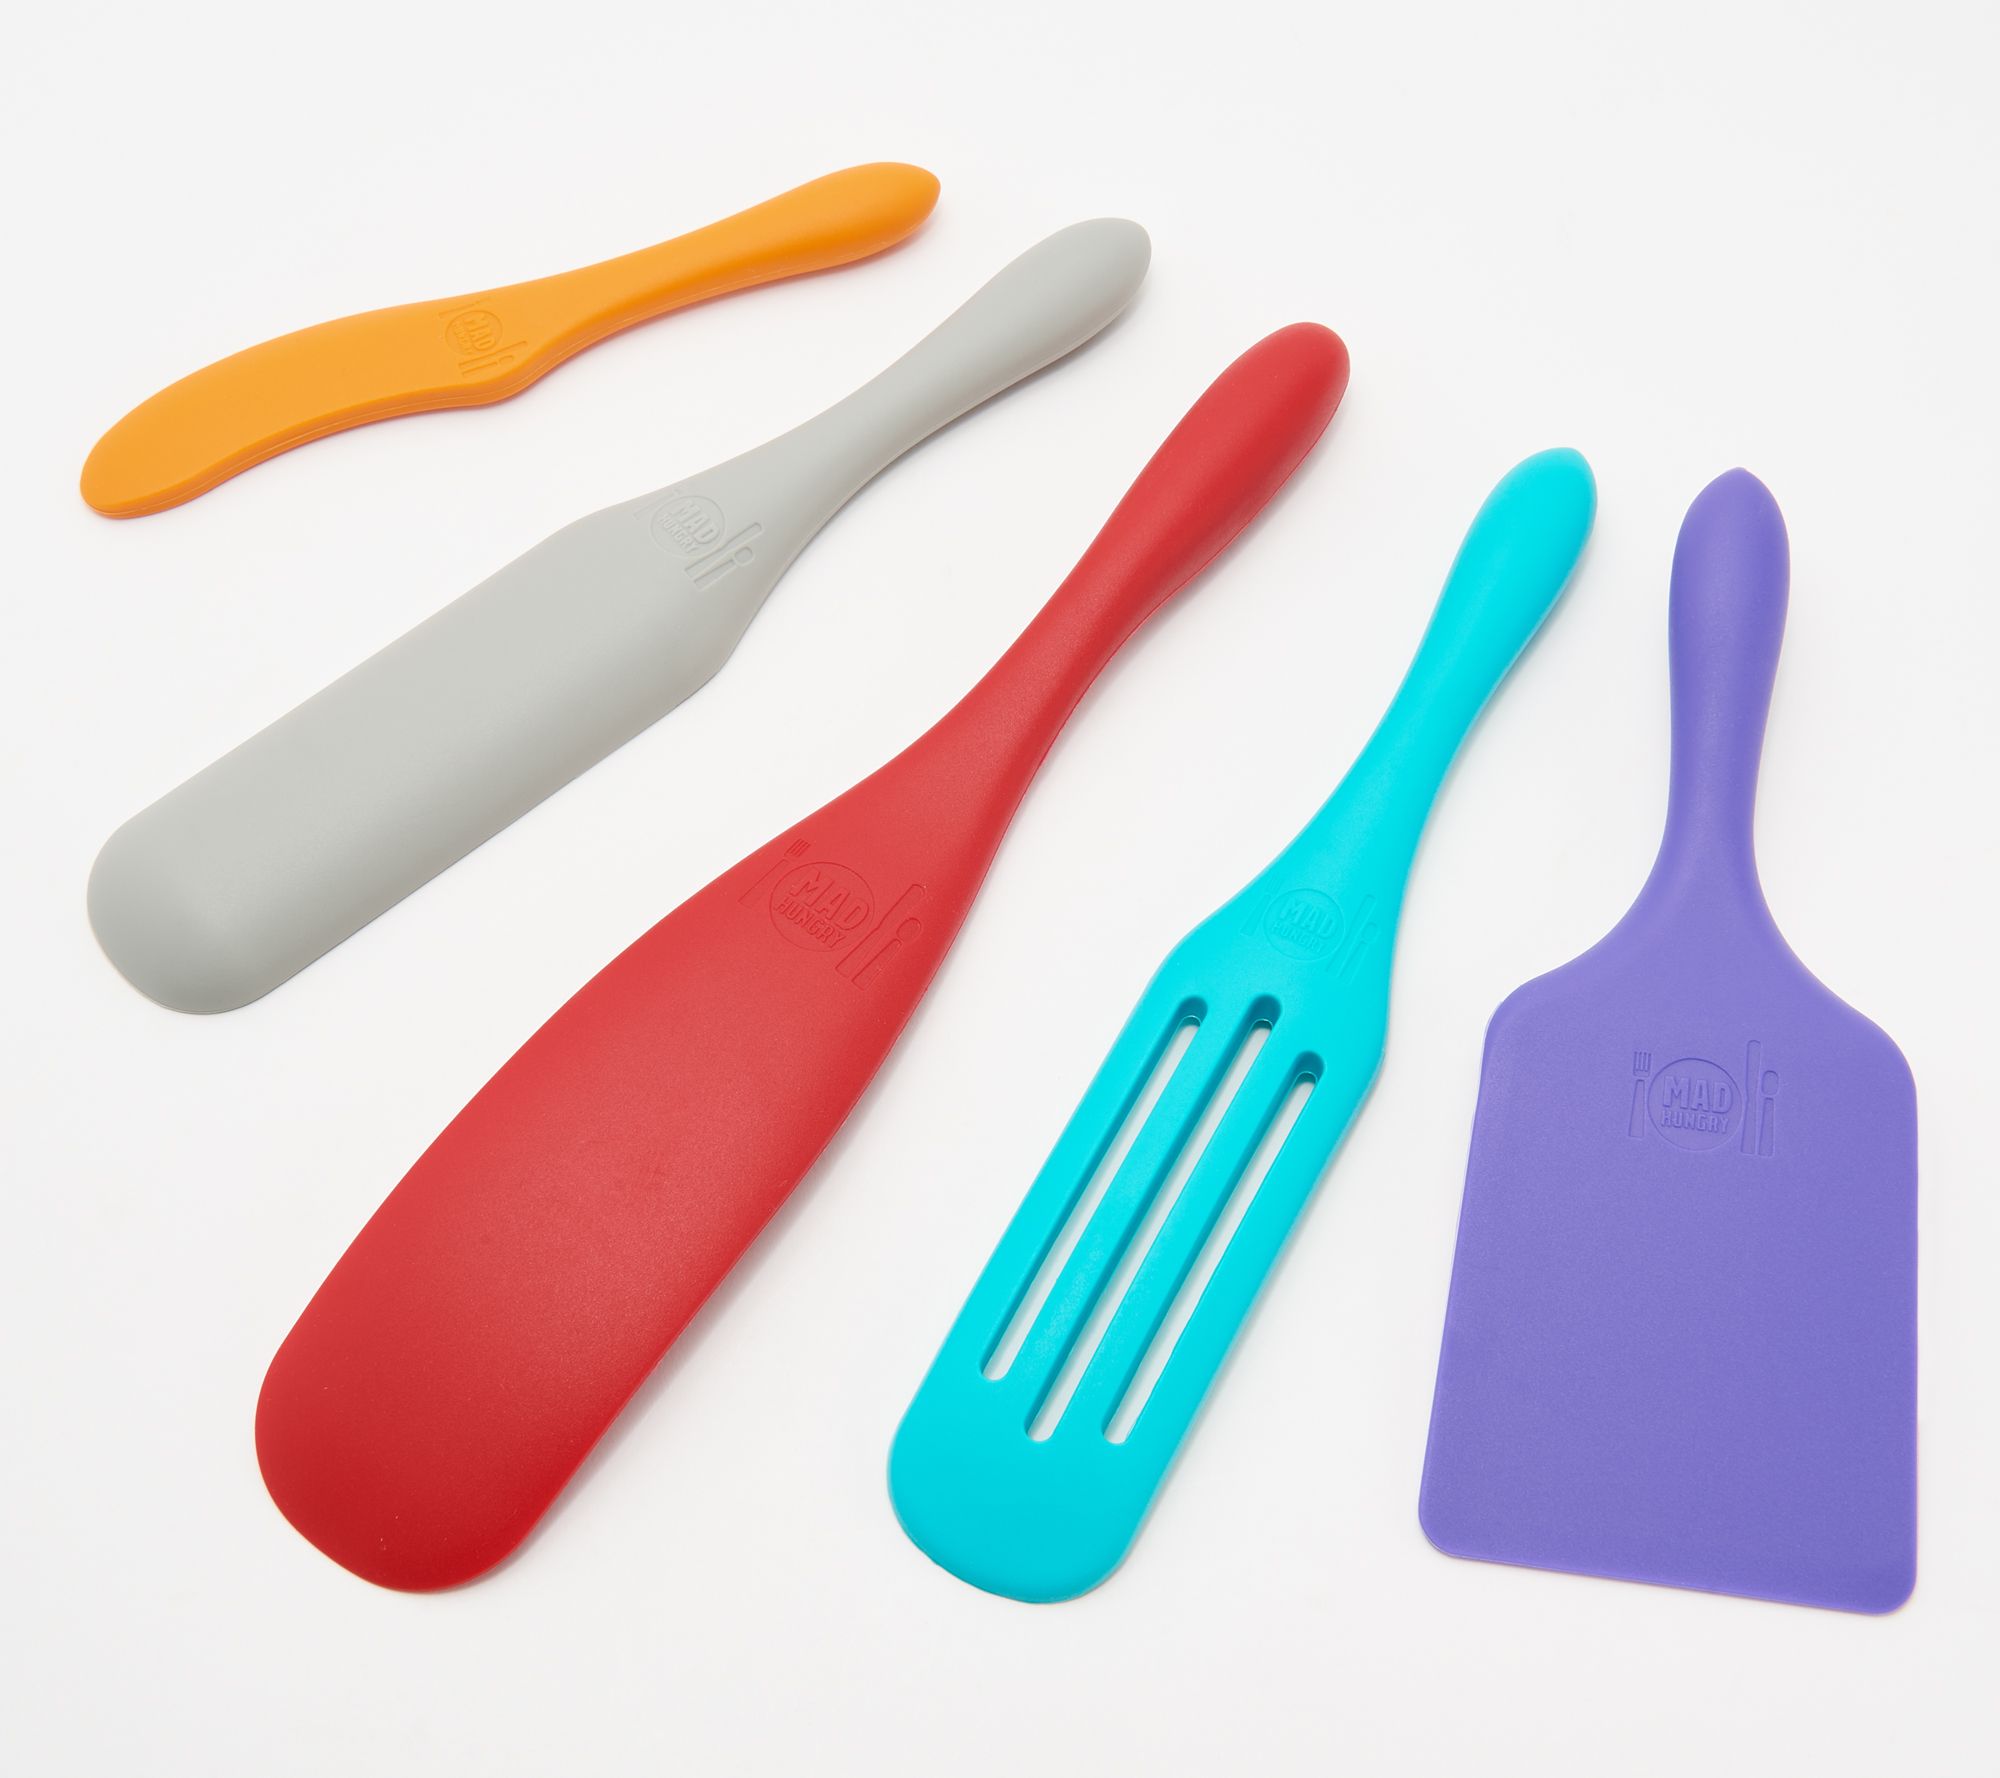 Mad Hungry 5-Piece Mini Silicone Spurtle Set 